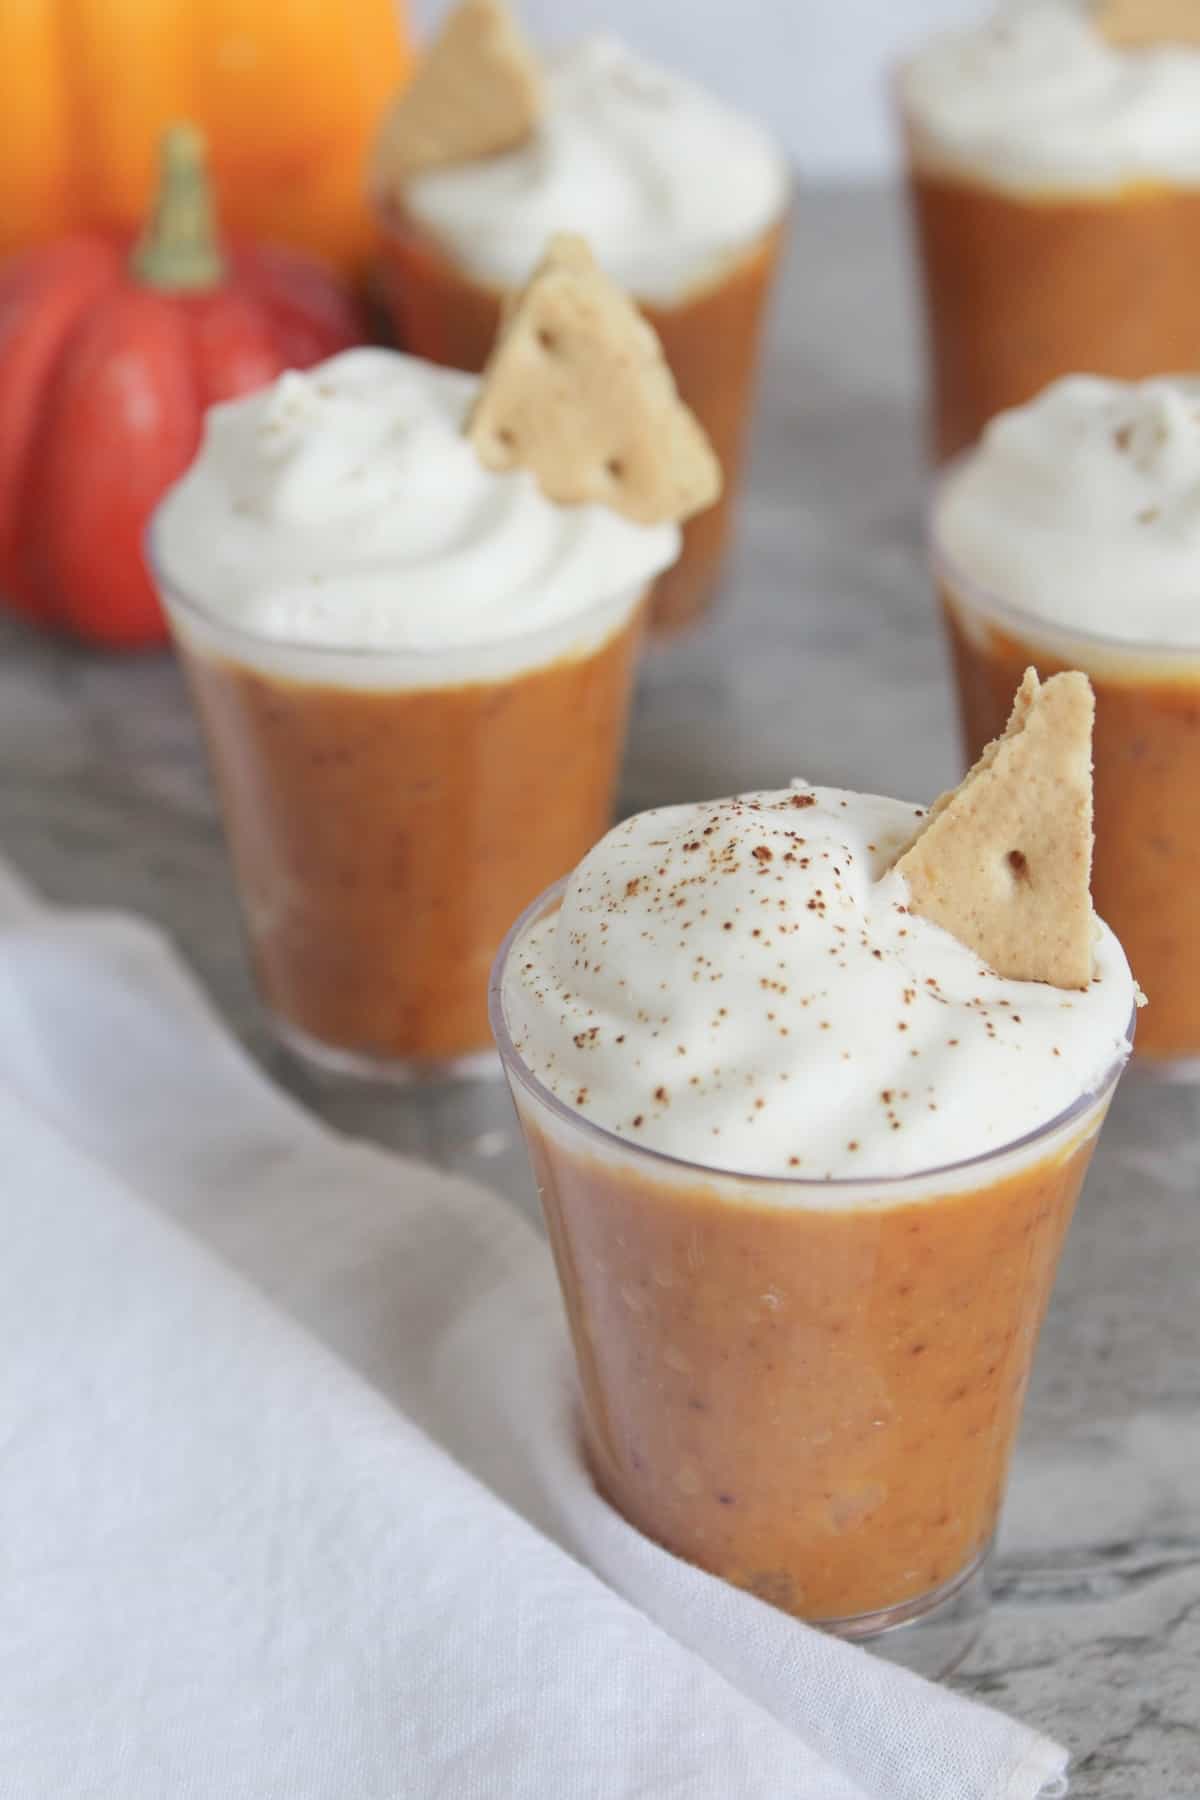 Pumpkin pudding in shot glasses topped with whipped cream.